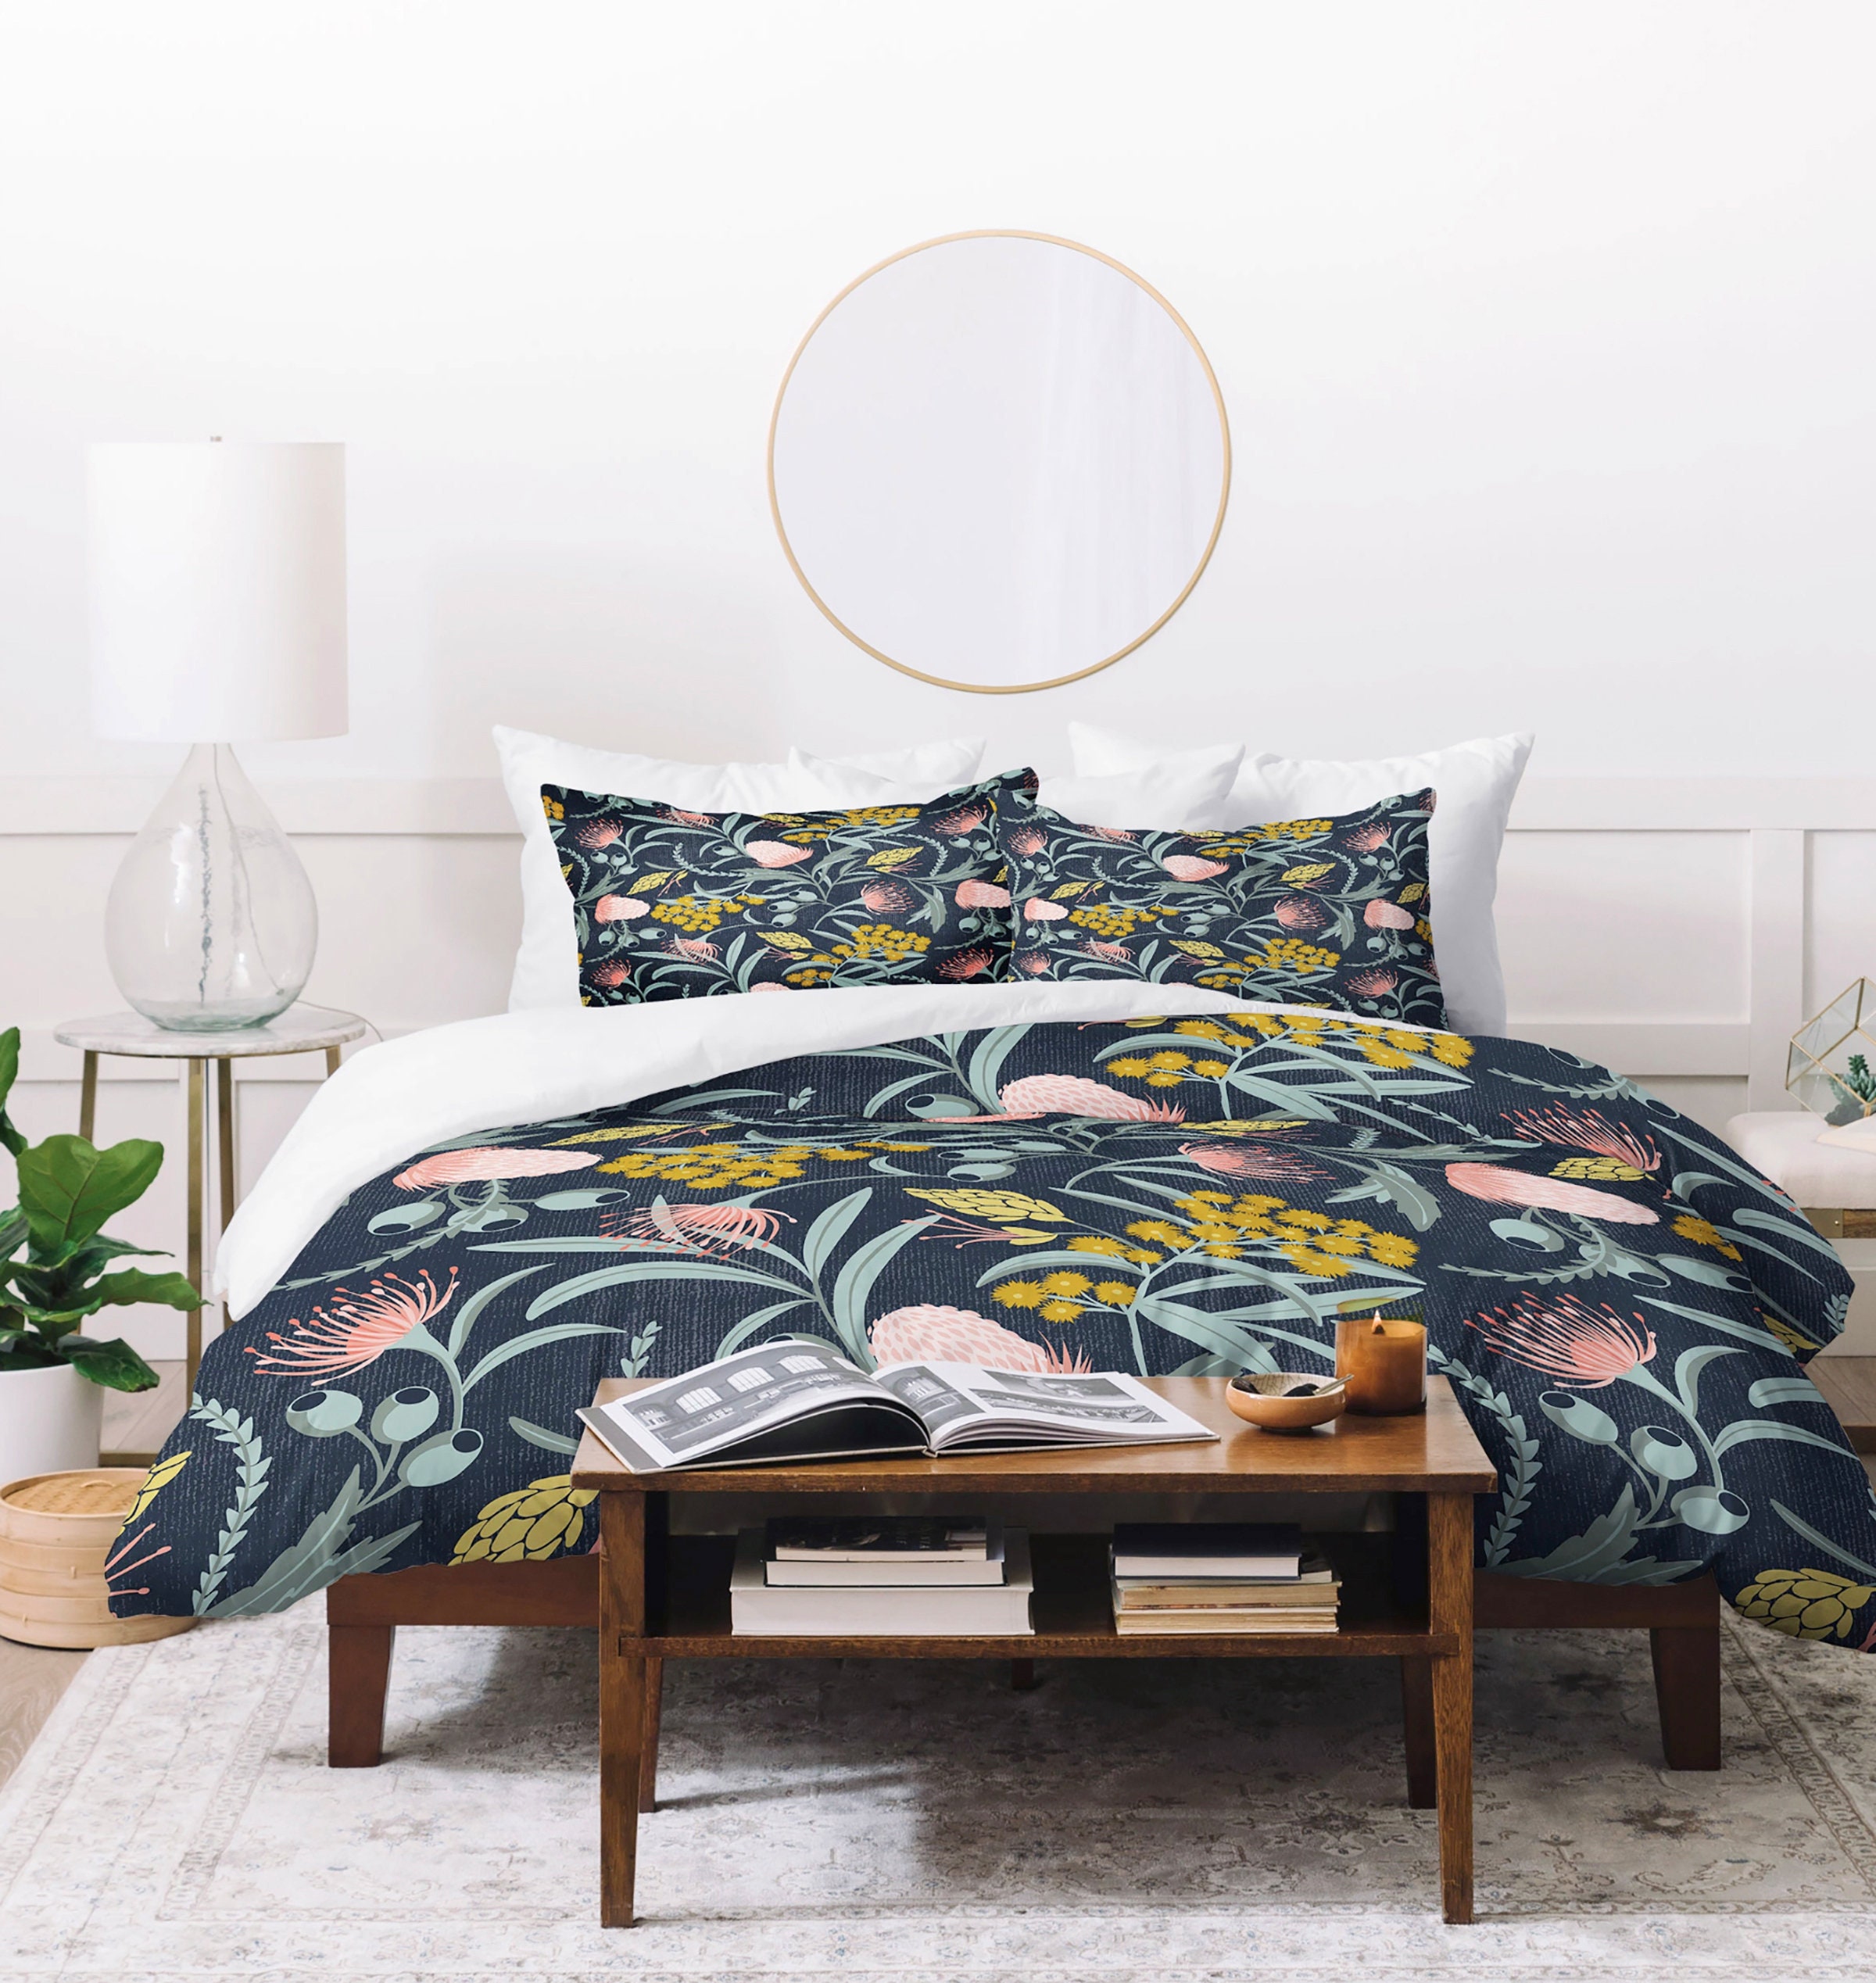 Leadtimes Duvet Cover Queen Floral Bedding Comforter Cover with 1 Boho Duvet Cover and 2 Pillowcases Queen, Style2 